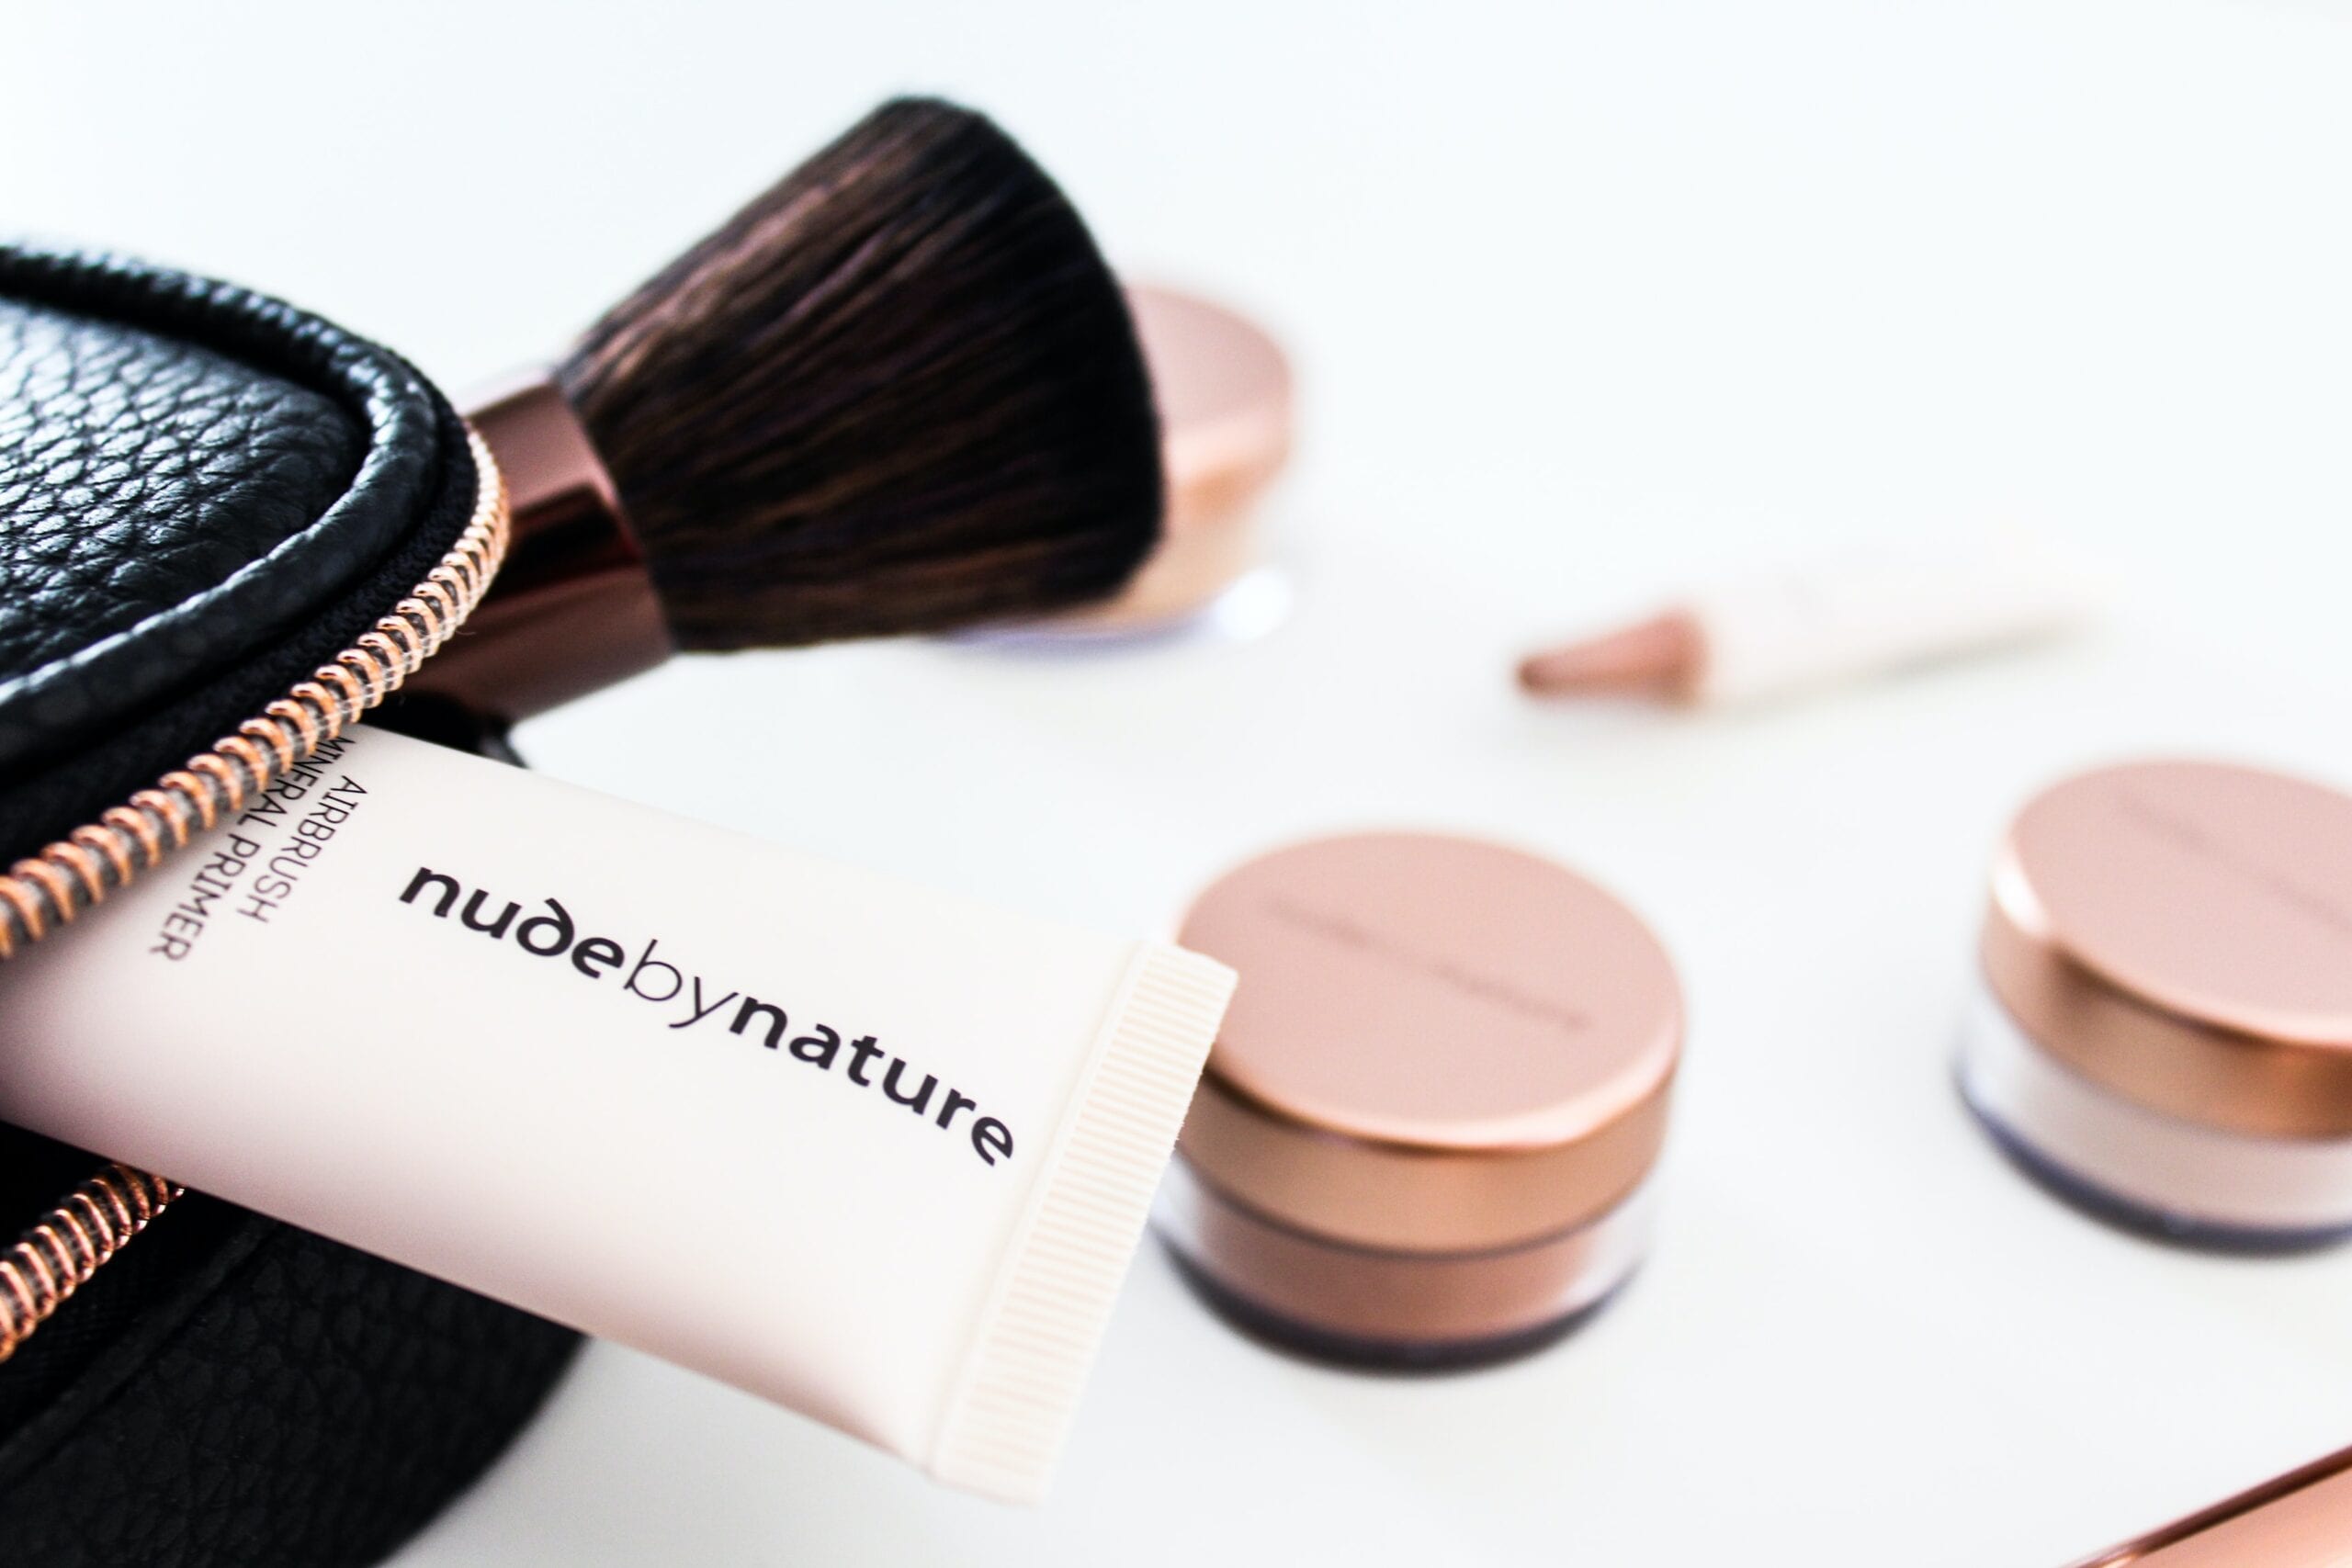 5 Best Foundation For Dry Skin A Complete List